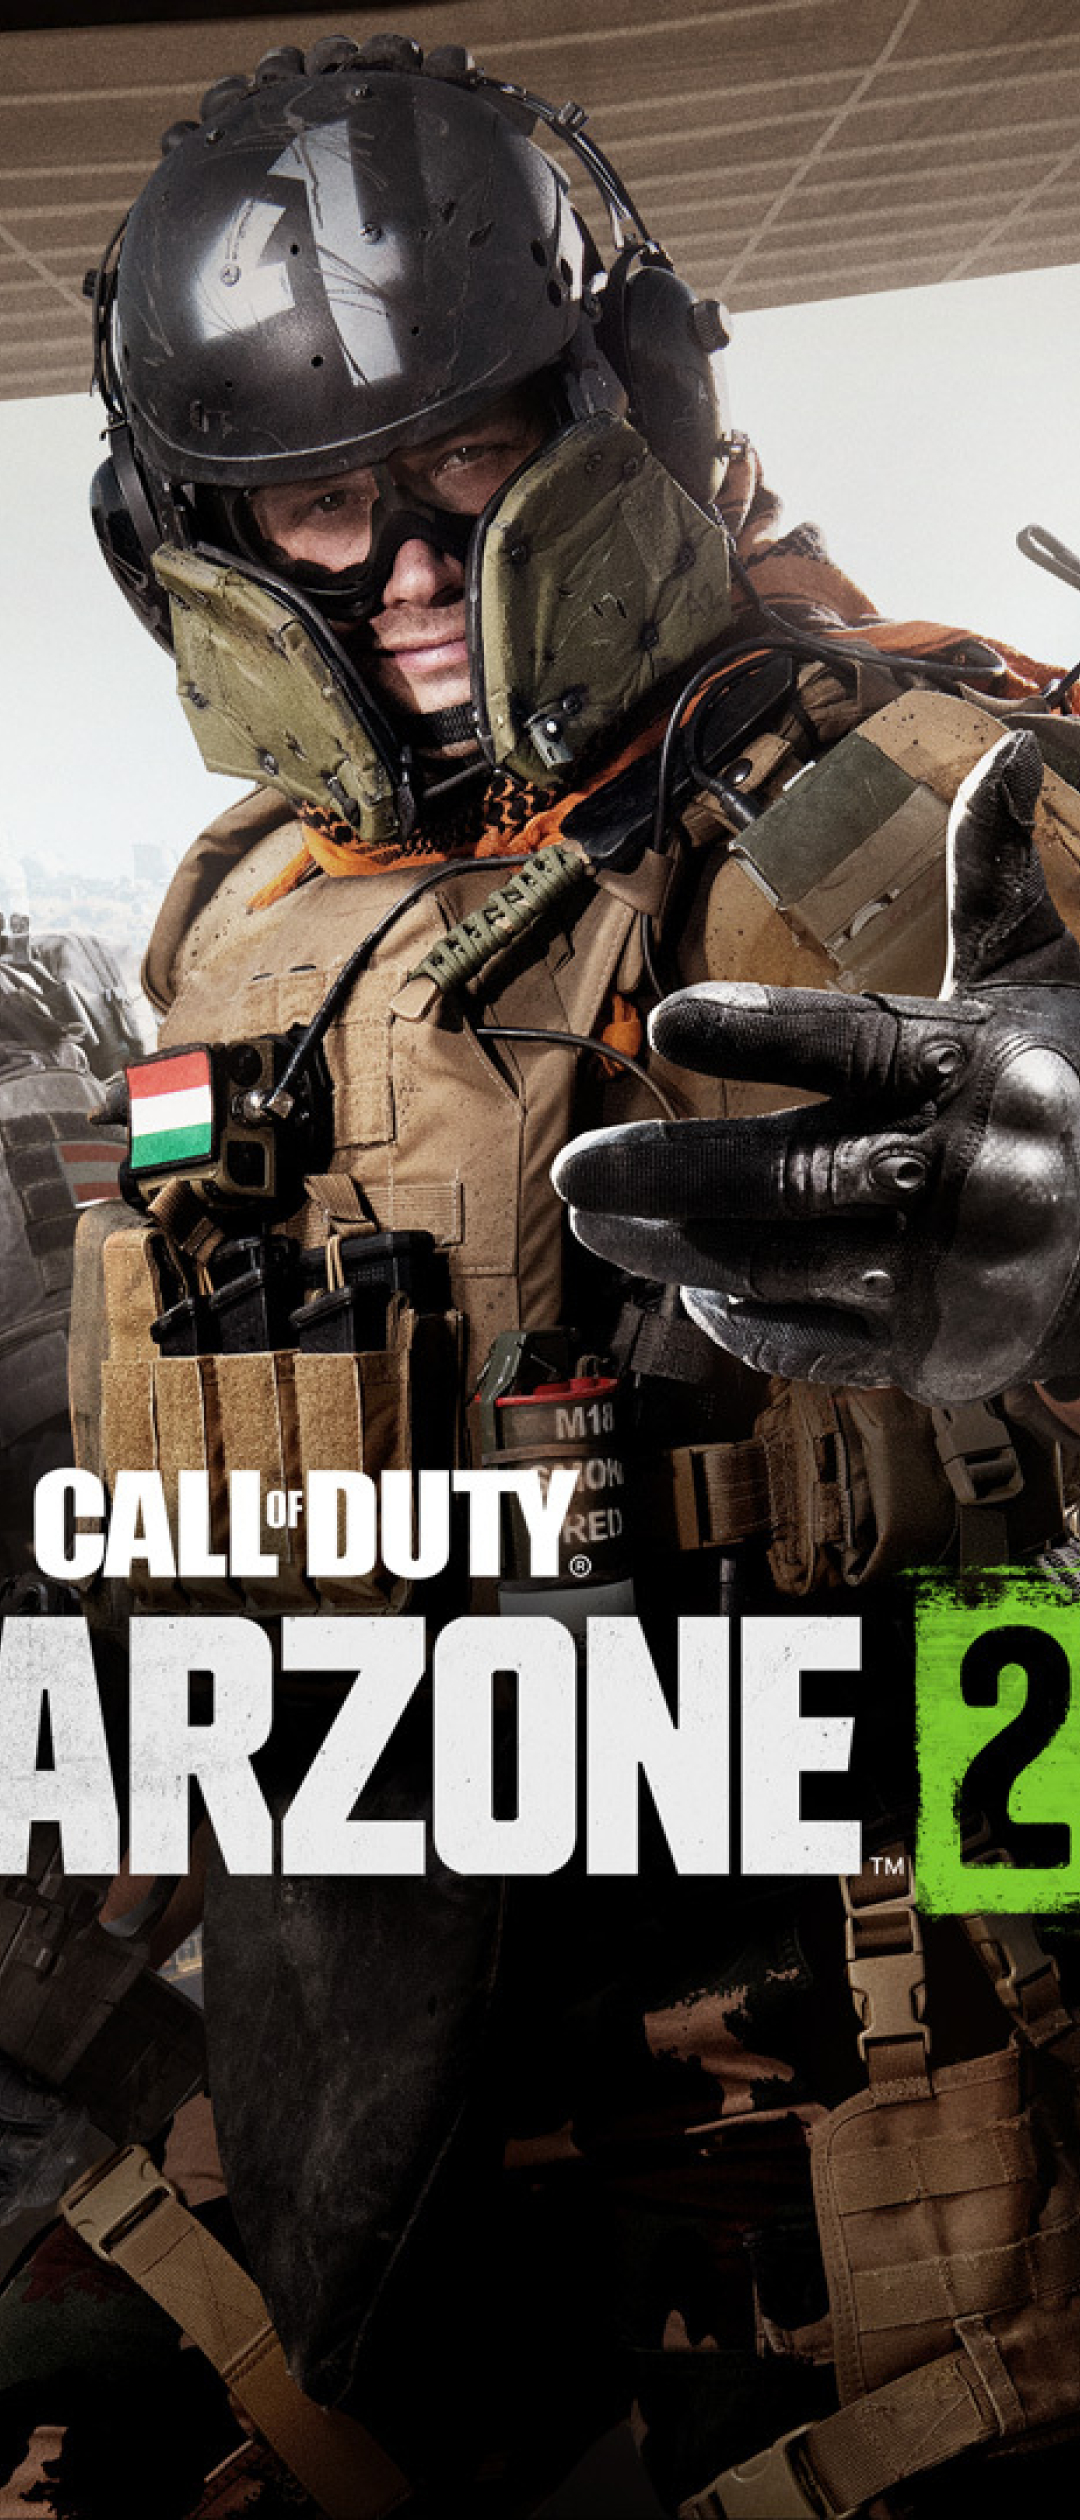 20 Call of Duty Warzone 20 HD Wallpapers and Backgrounds